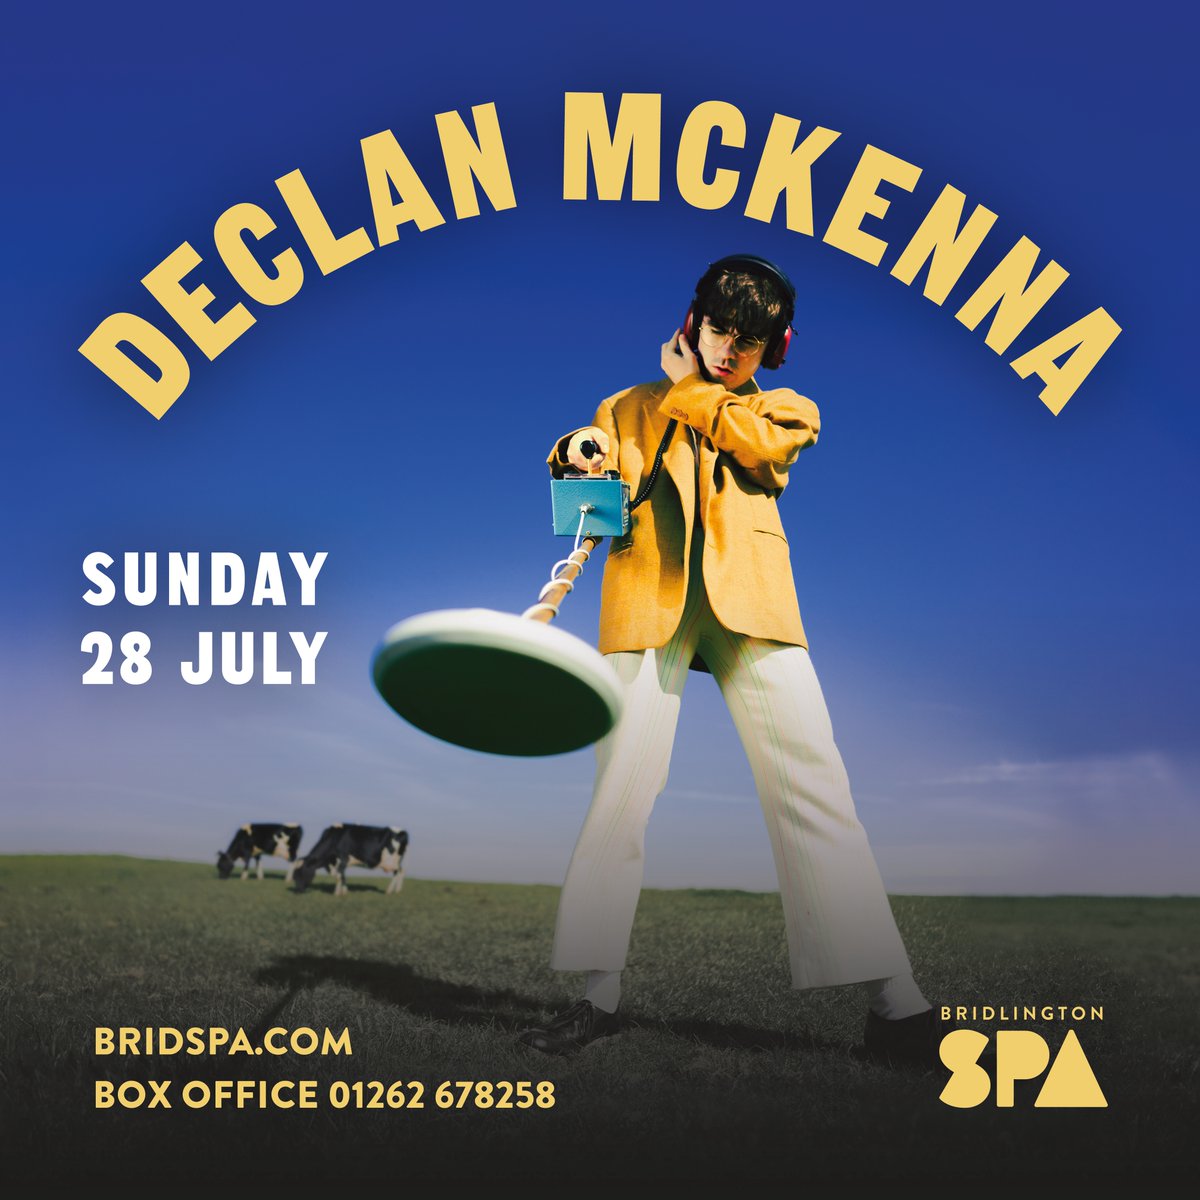 🗣️ @DeclanMckenna is heading to Bridlington this Summer! Tickets on general sale this Friday 10am. Membership pre-sale starts Wednesday 10am 👉🏻 More Info orlo.uk/A3AY9